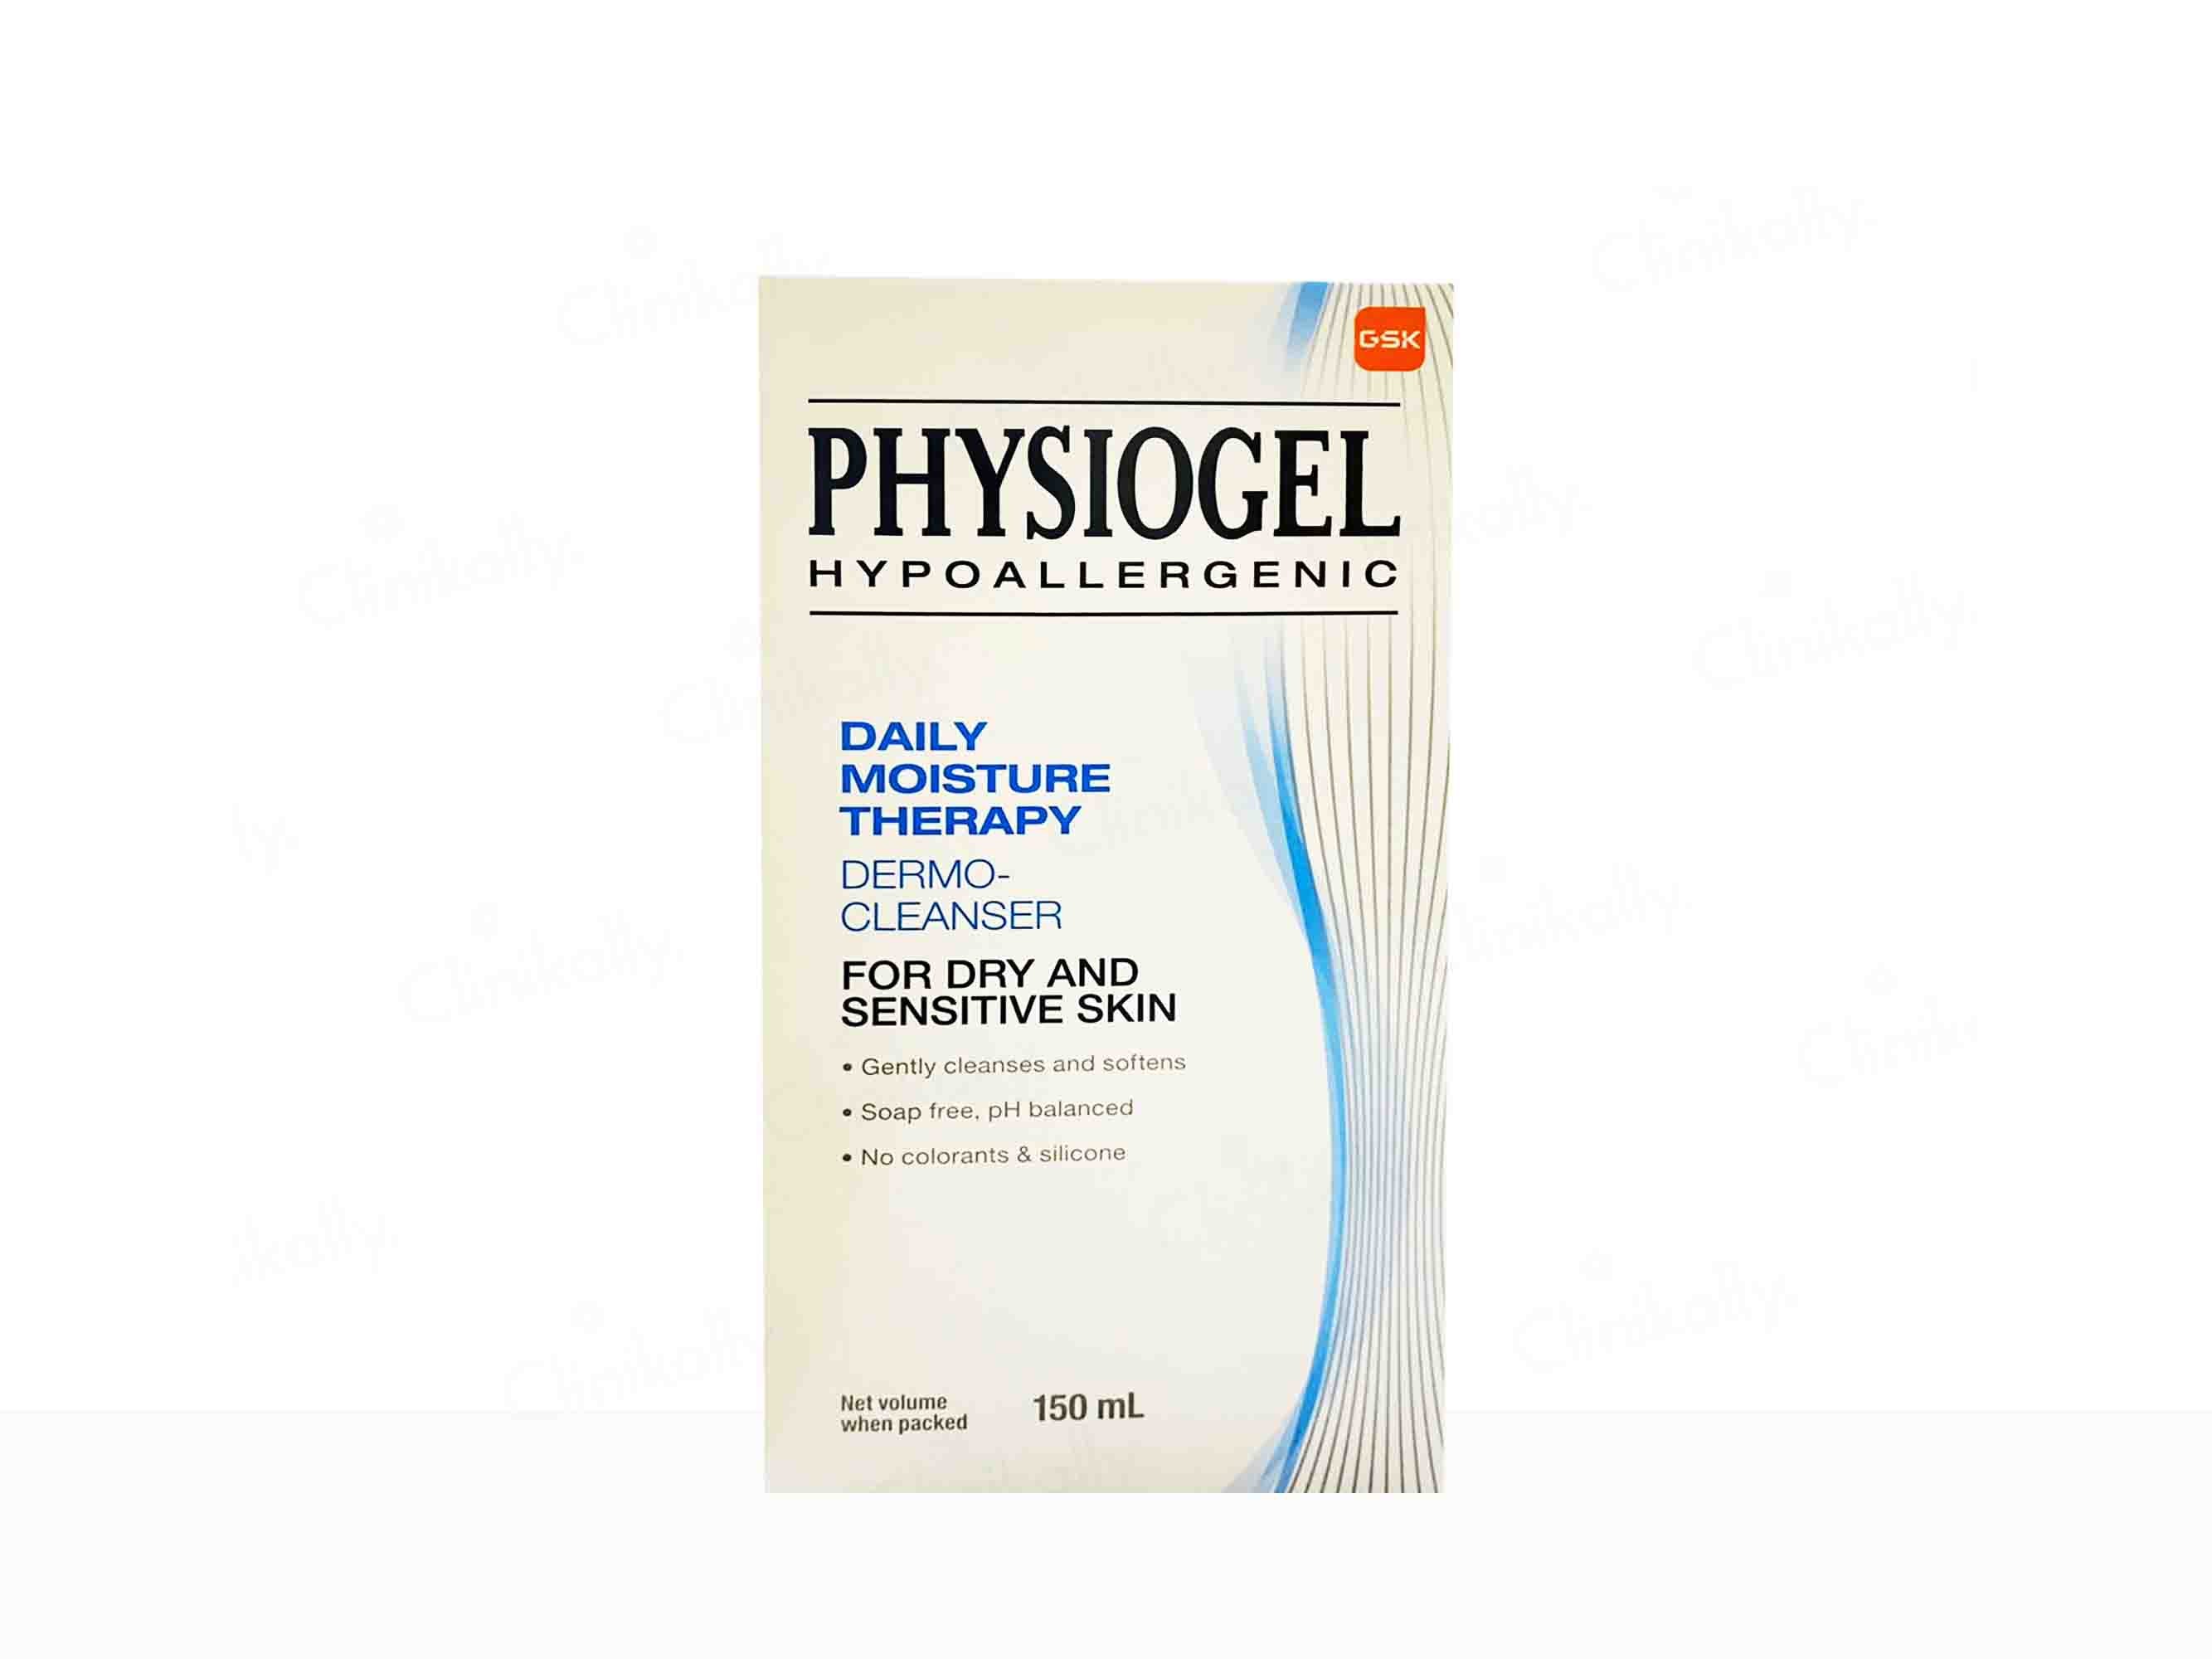 Physiogel Hypoallergenic Daily Moisture Therapy Dermo-Cleanser For Dry & Sensitive Skin